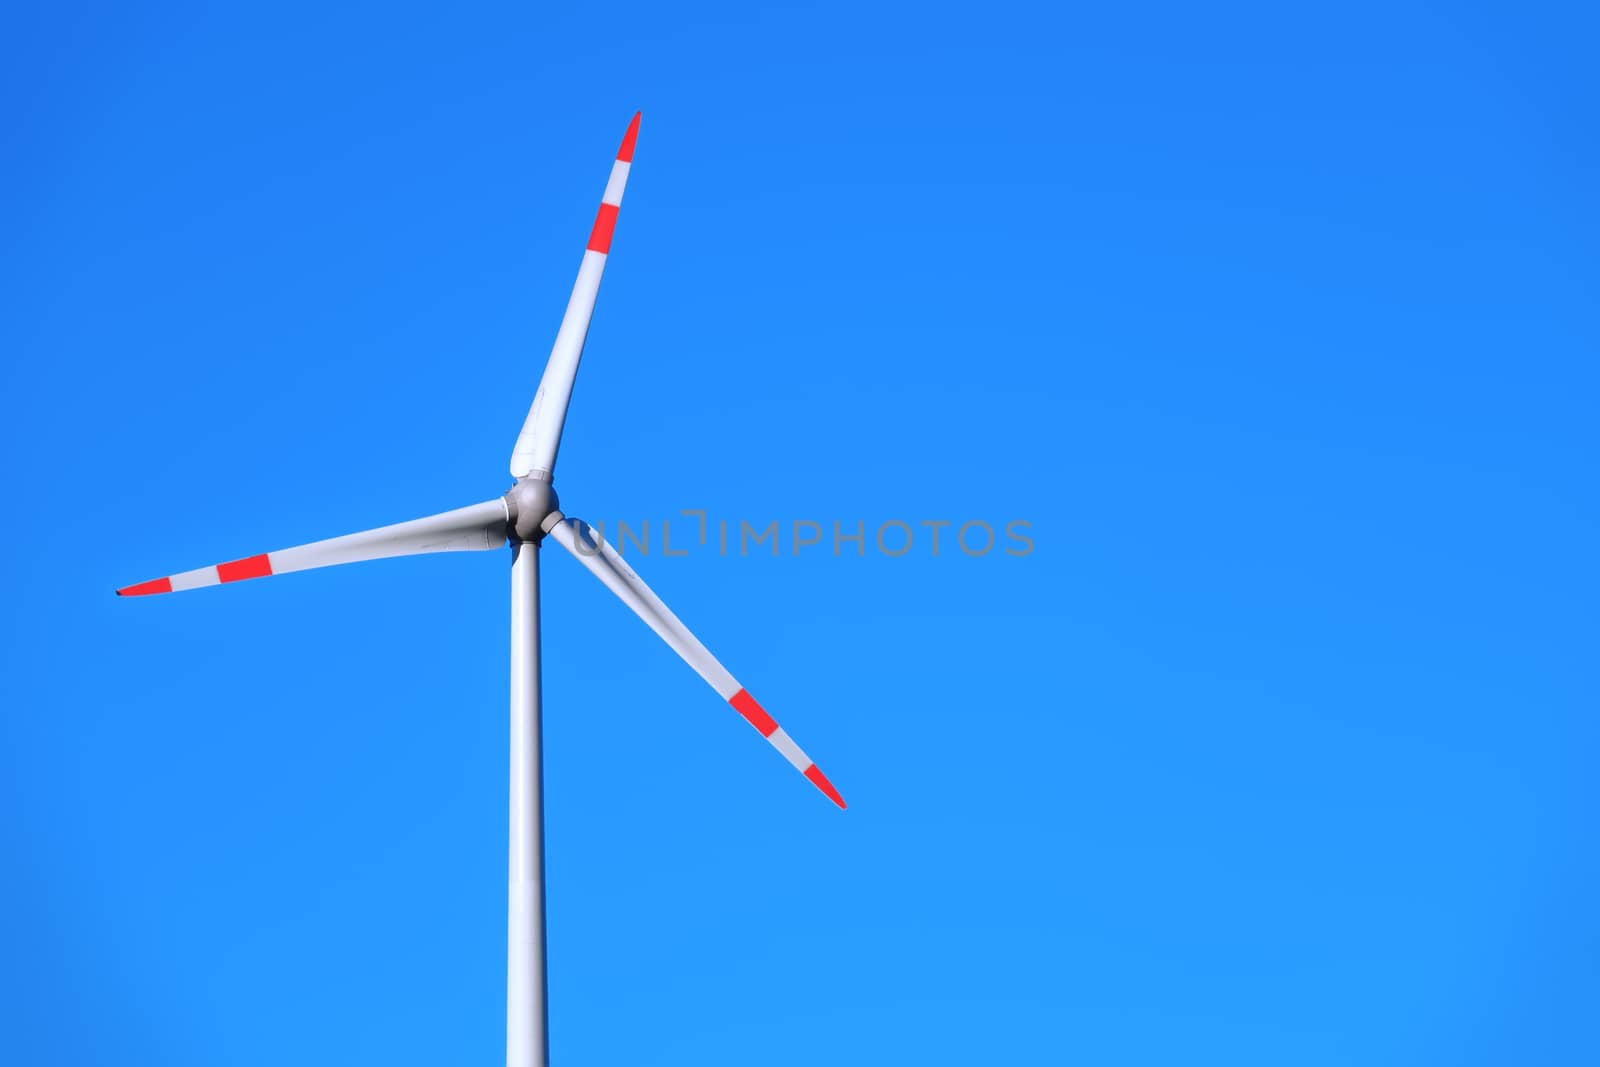 An image of a wind energy detail blue sky